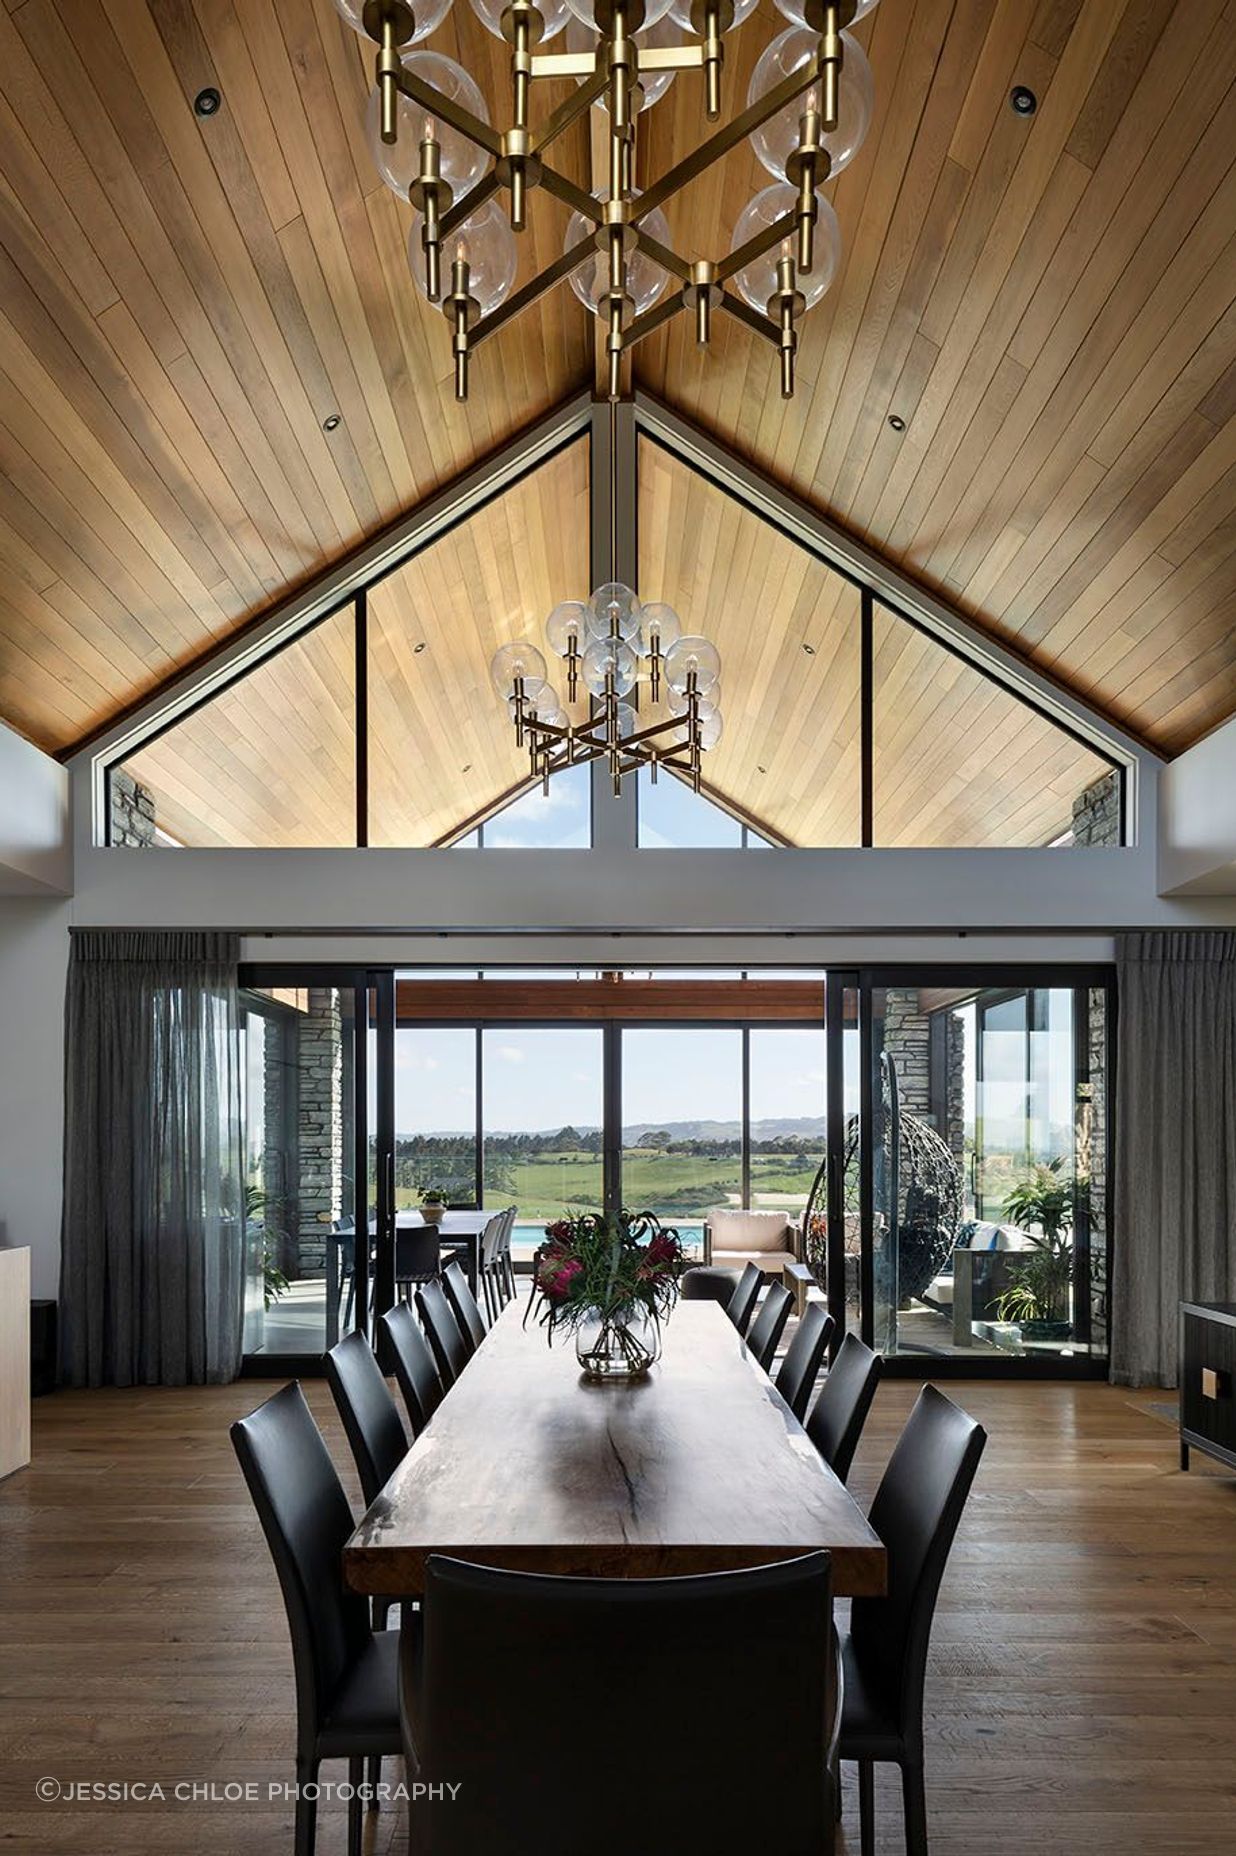 Vaulted cedar ceilings flow through to the conservatory with reflected clerestory windows.